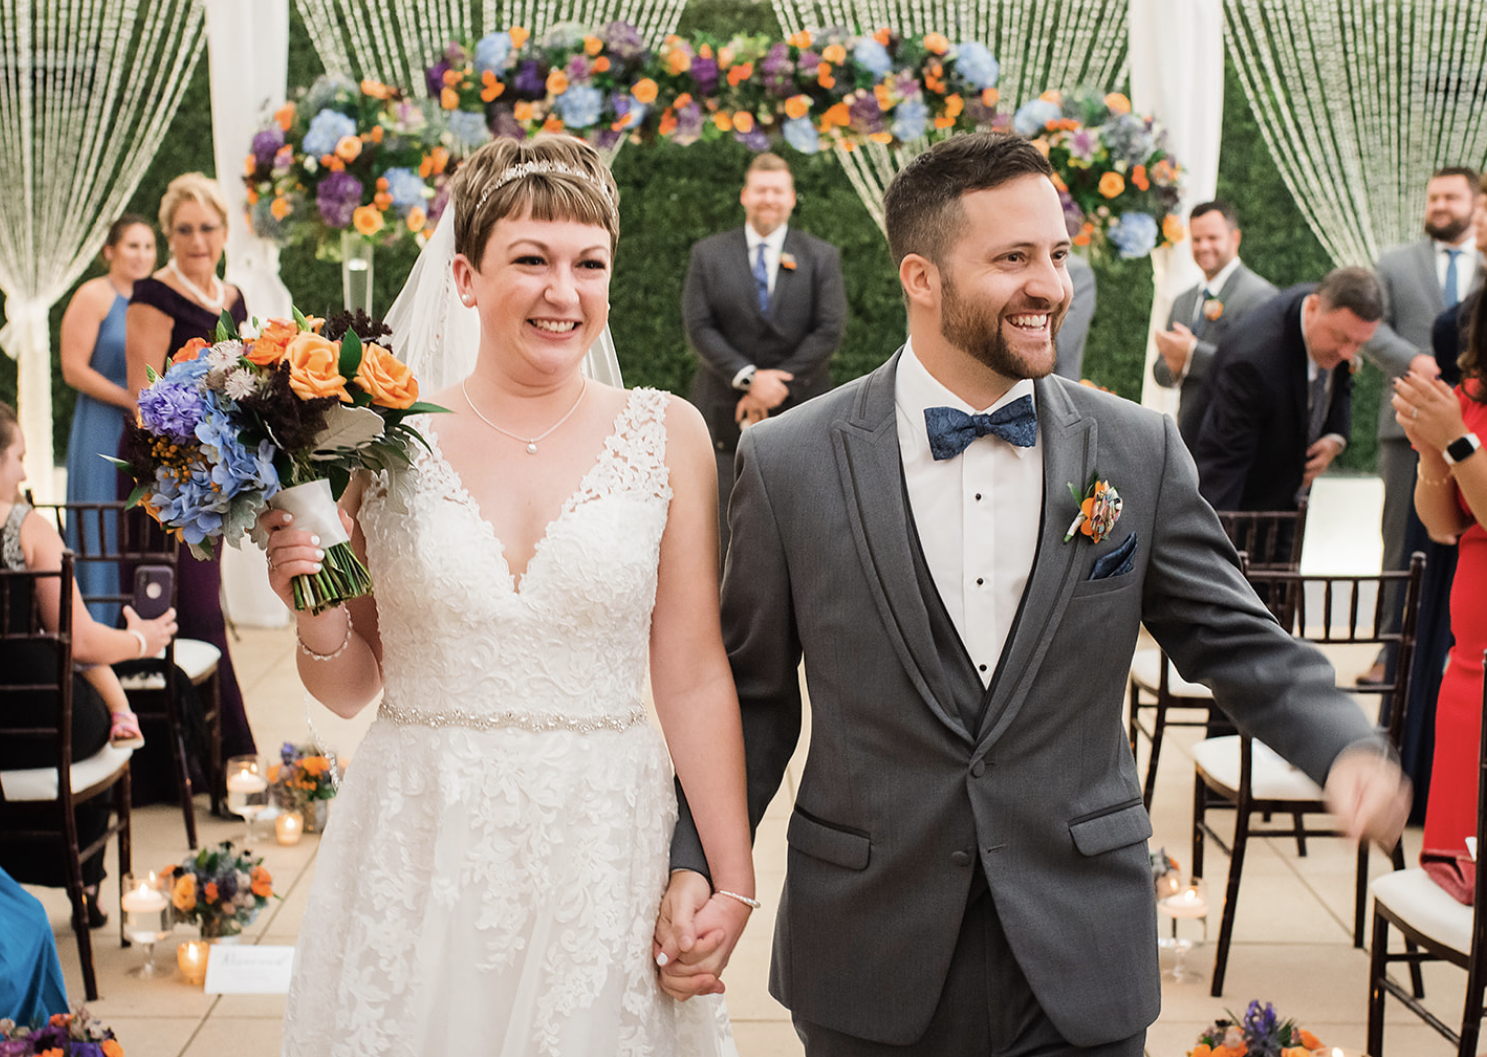 A smiling bride and groom walk down the aisle after a wedding ceremony in the Sam Houston Hotel Veranda